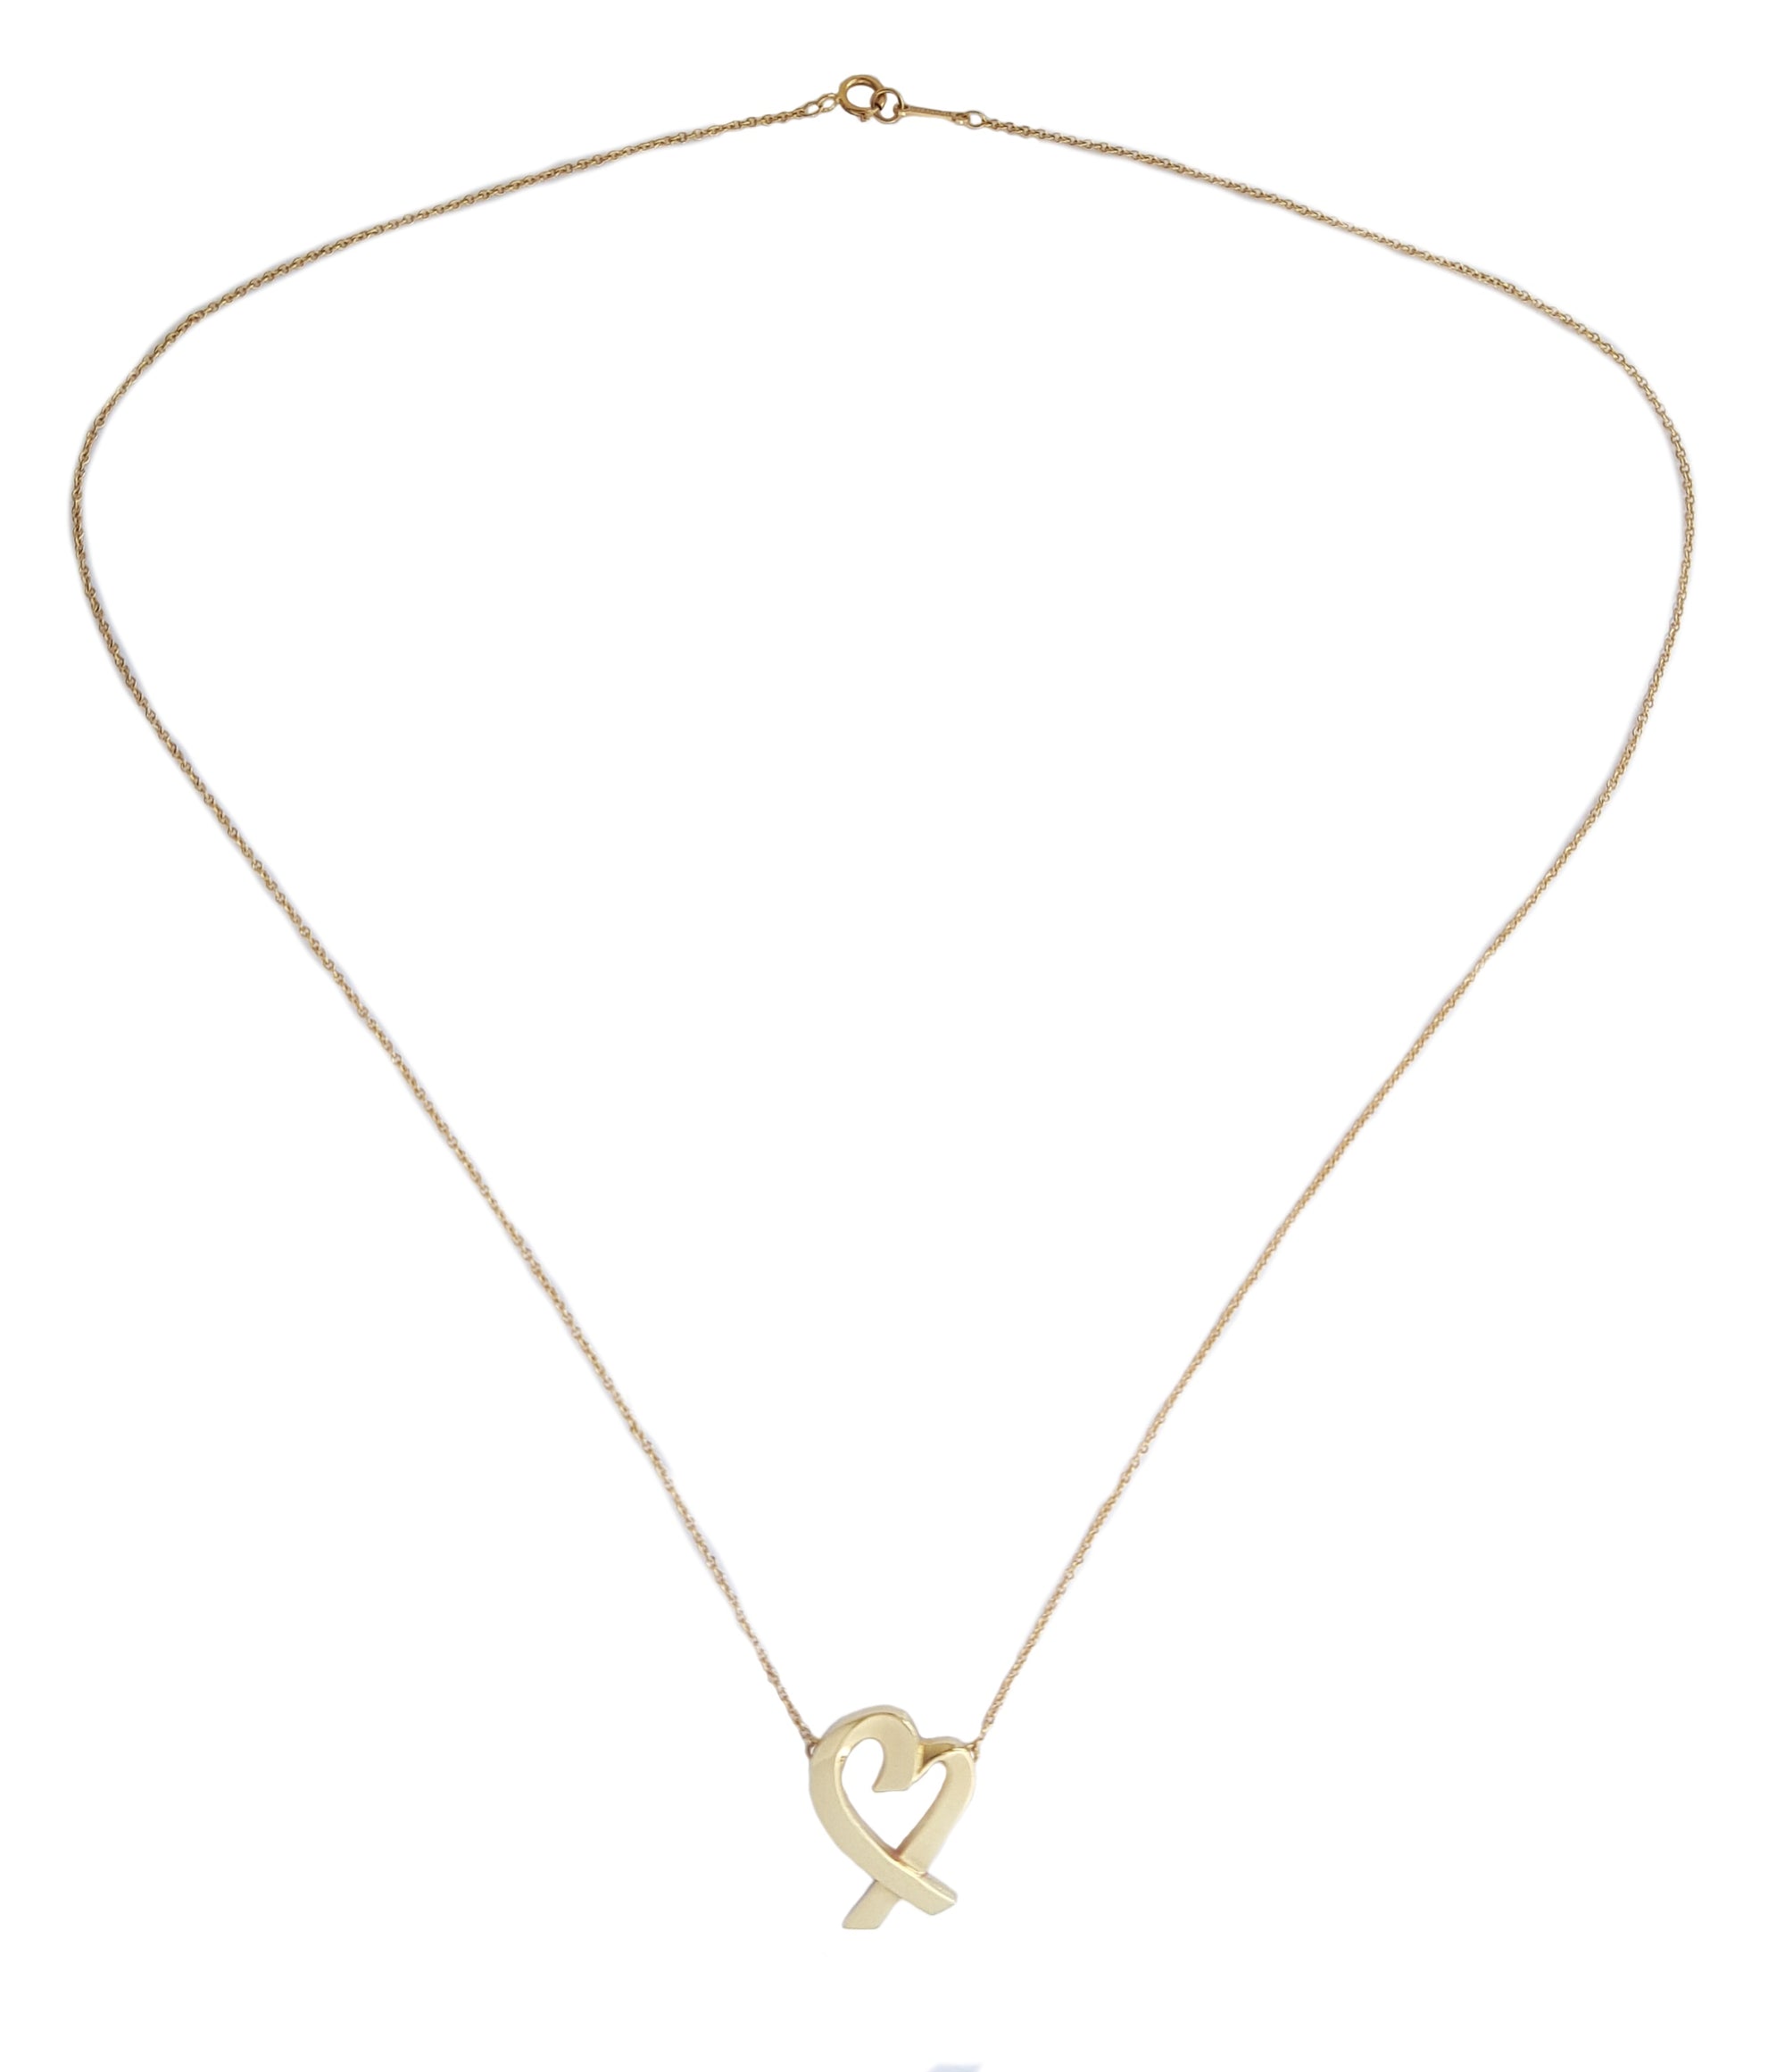 Tiffany & Co Paloma Picasso Loving Heart 750 (Gold) Necklace 18" Large